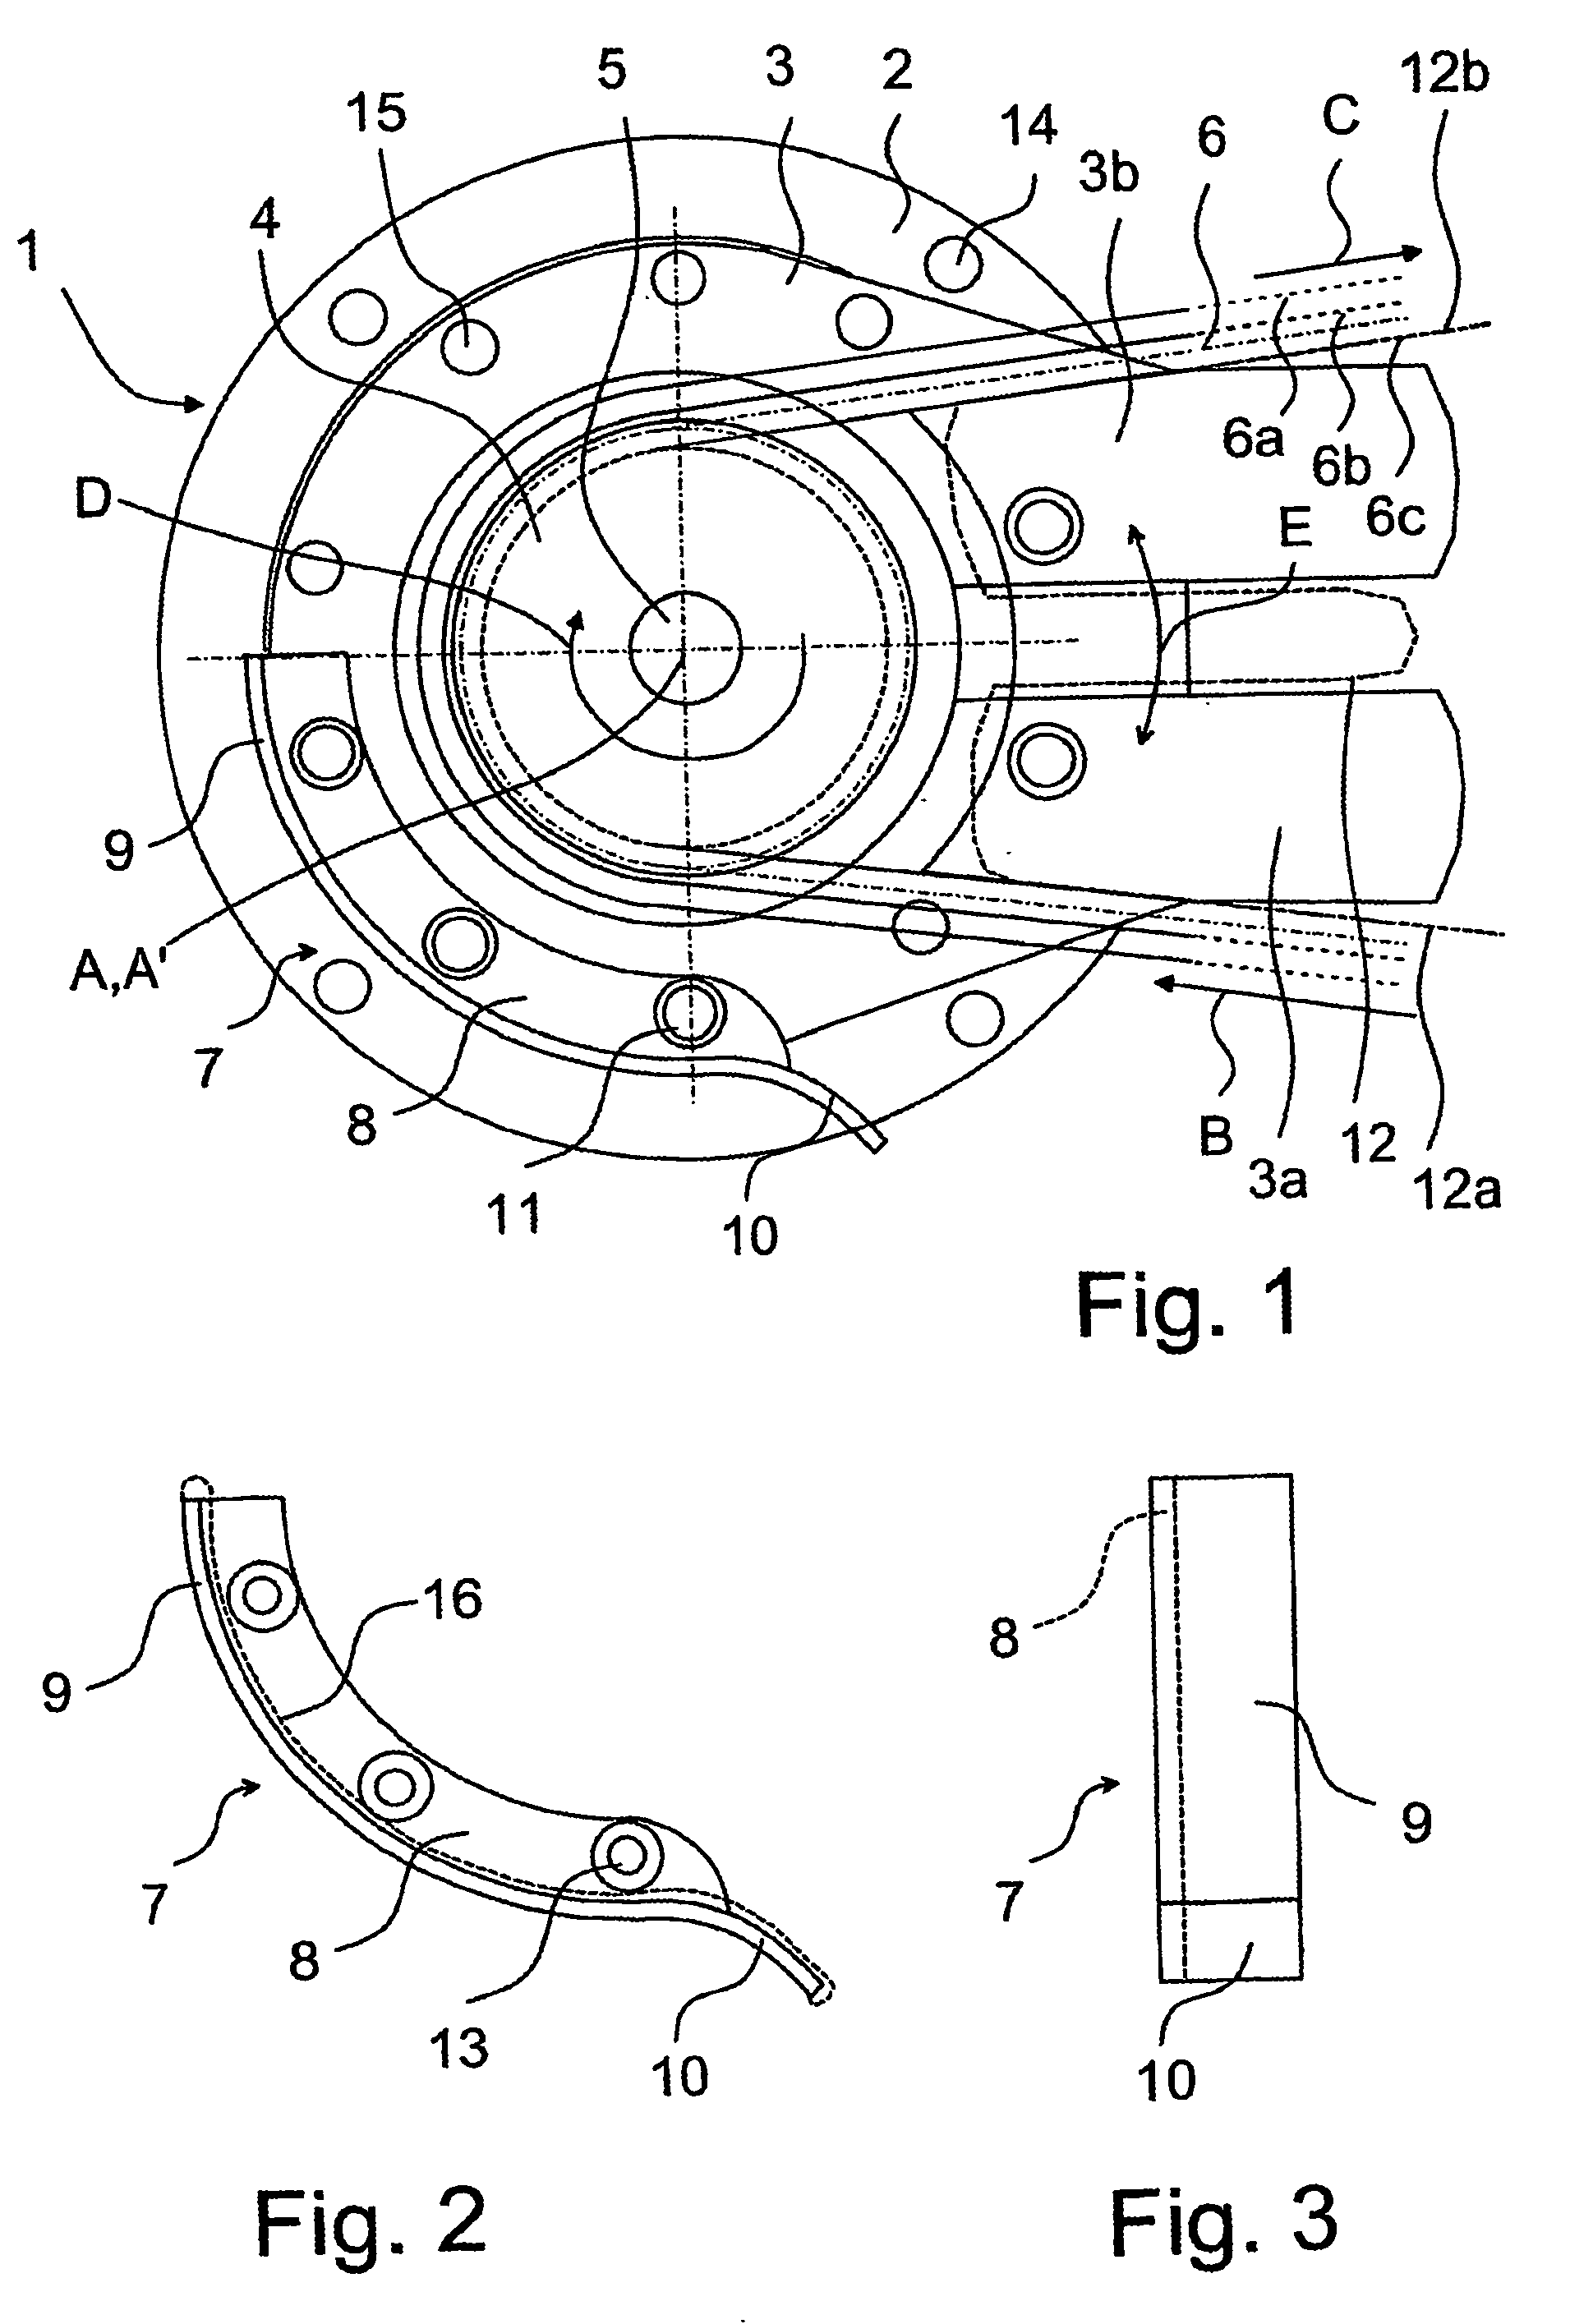 Sawing device and its safety system for precaution of a breaking saw chain